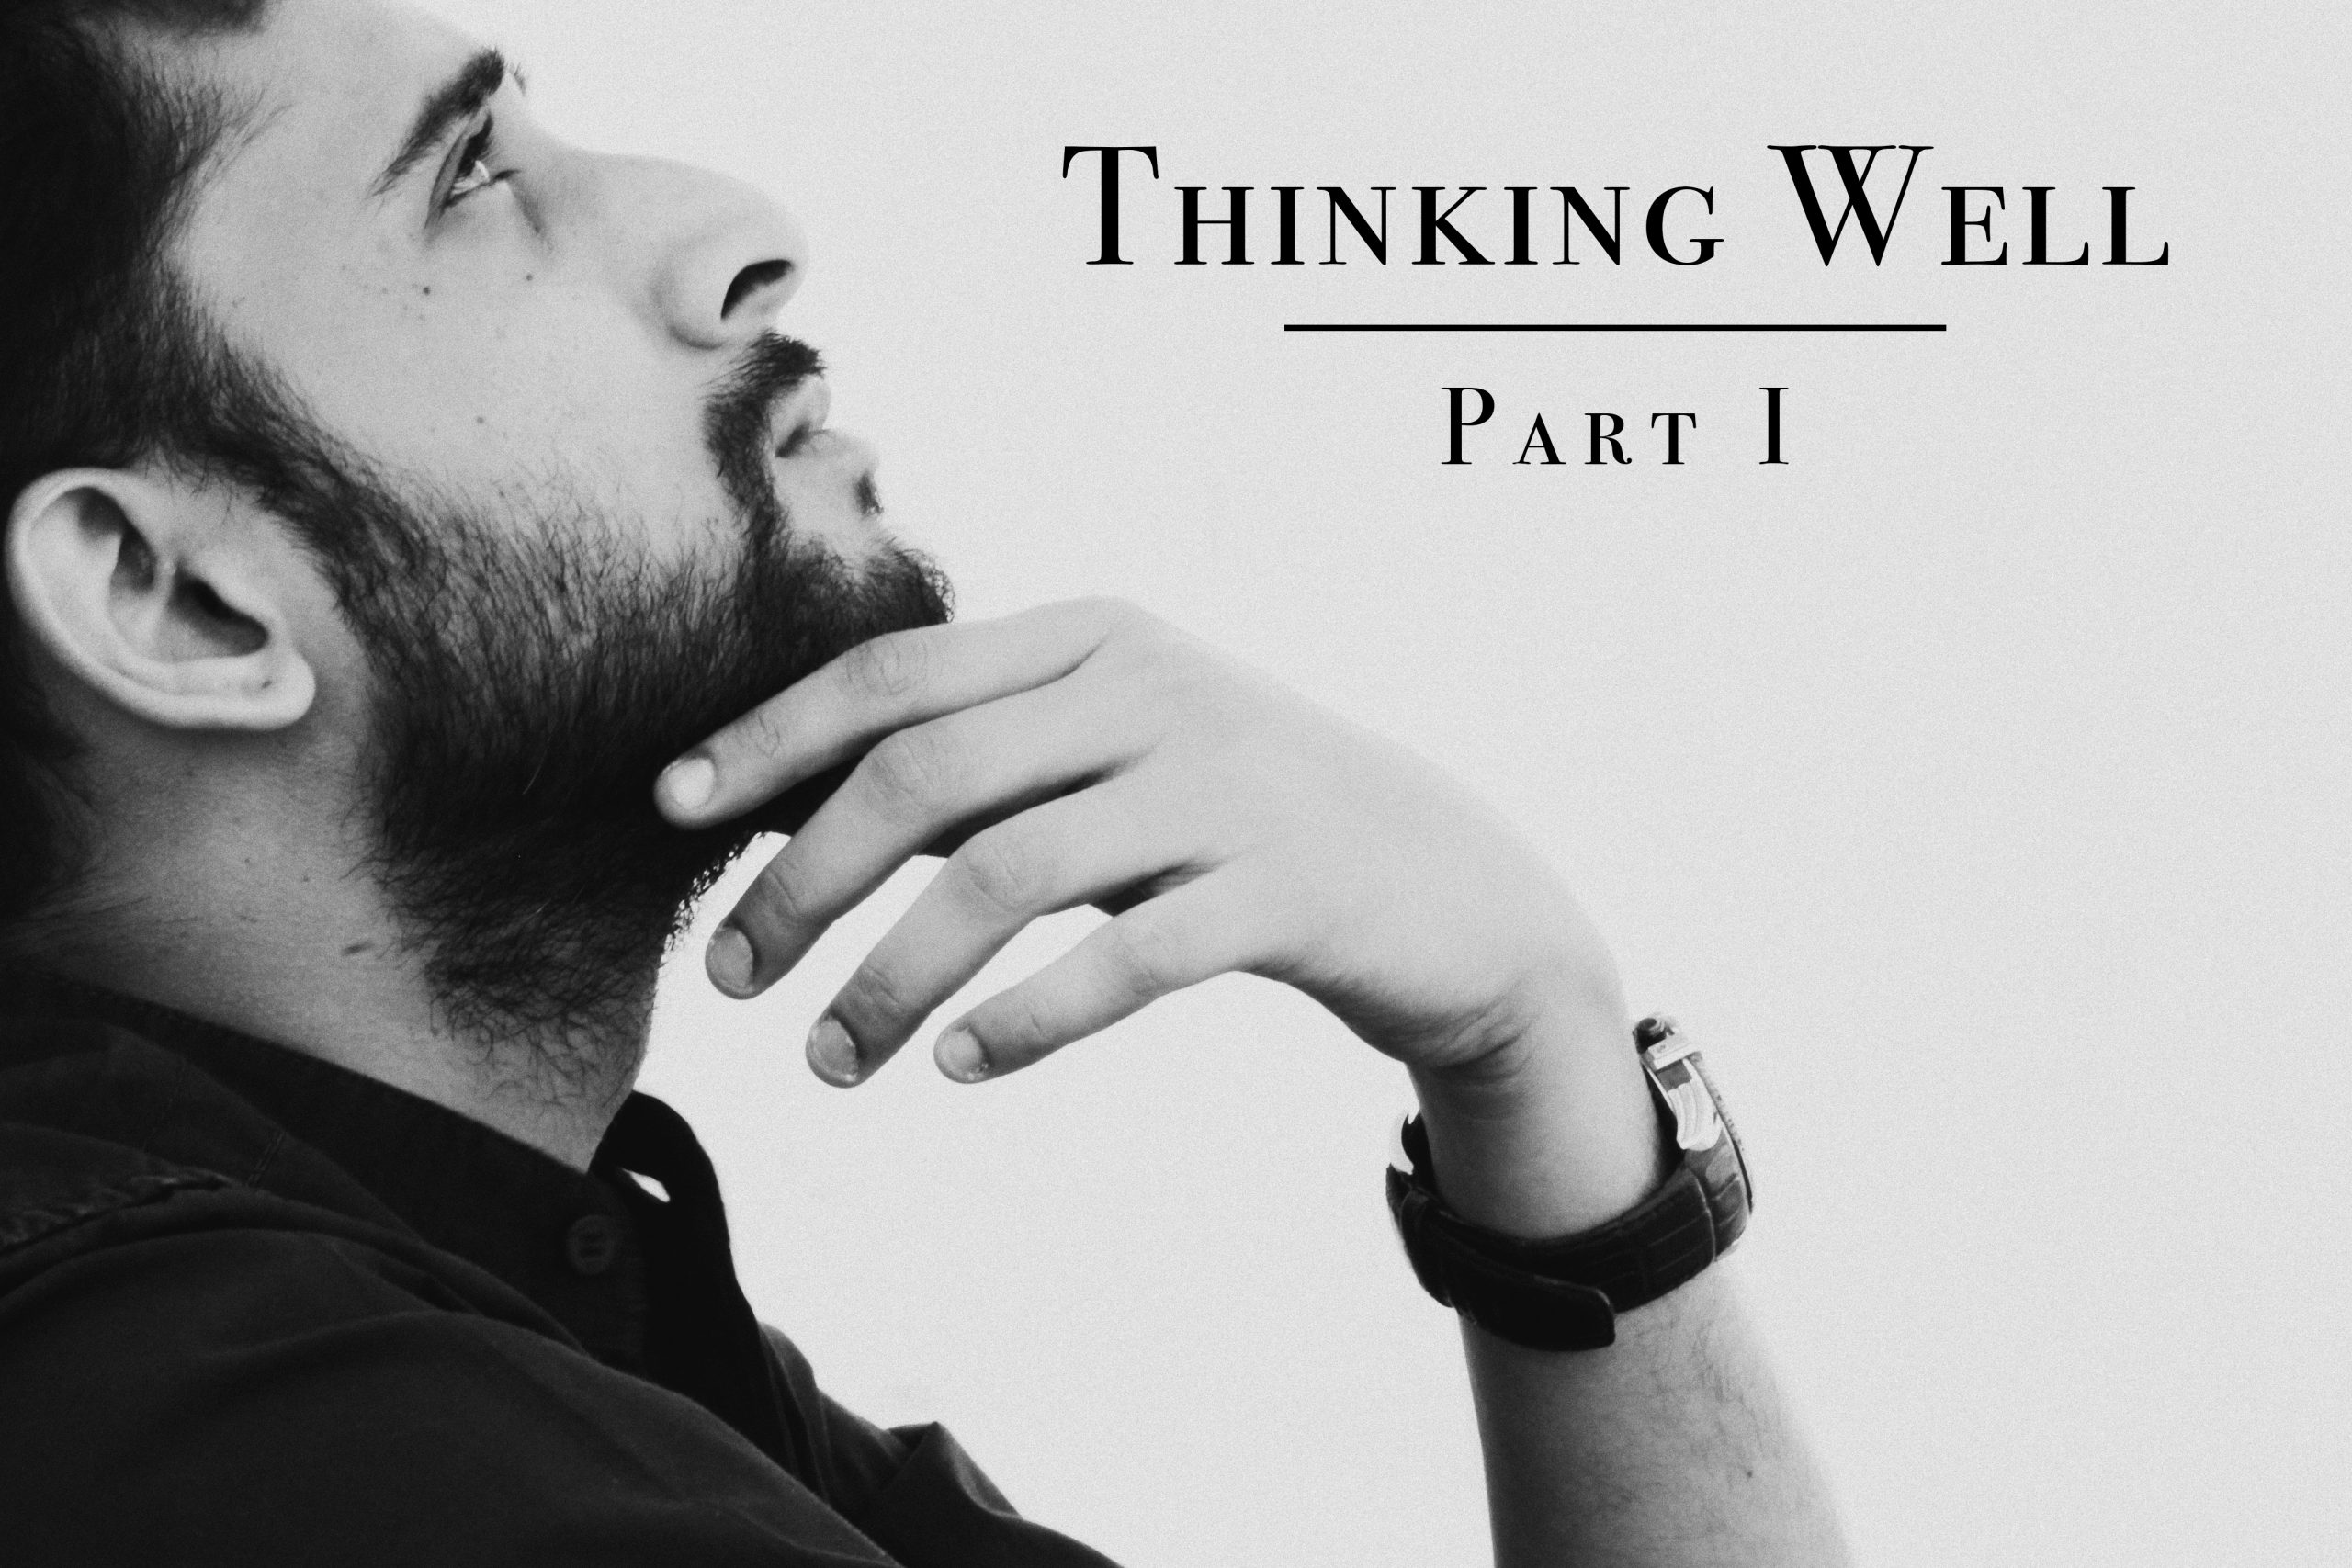 Thinking Well, Part I – Carmine Russo